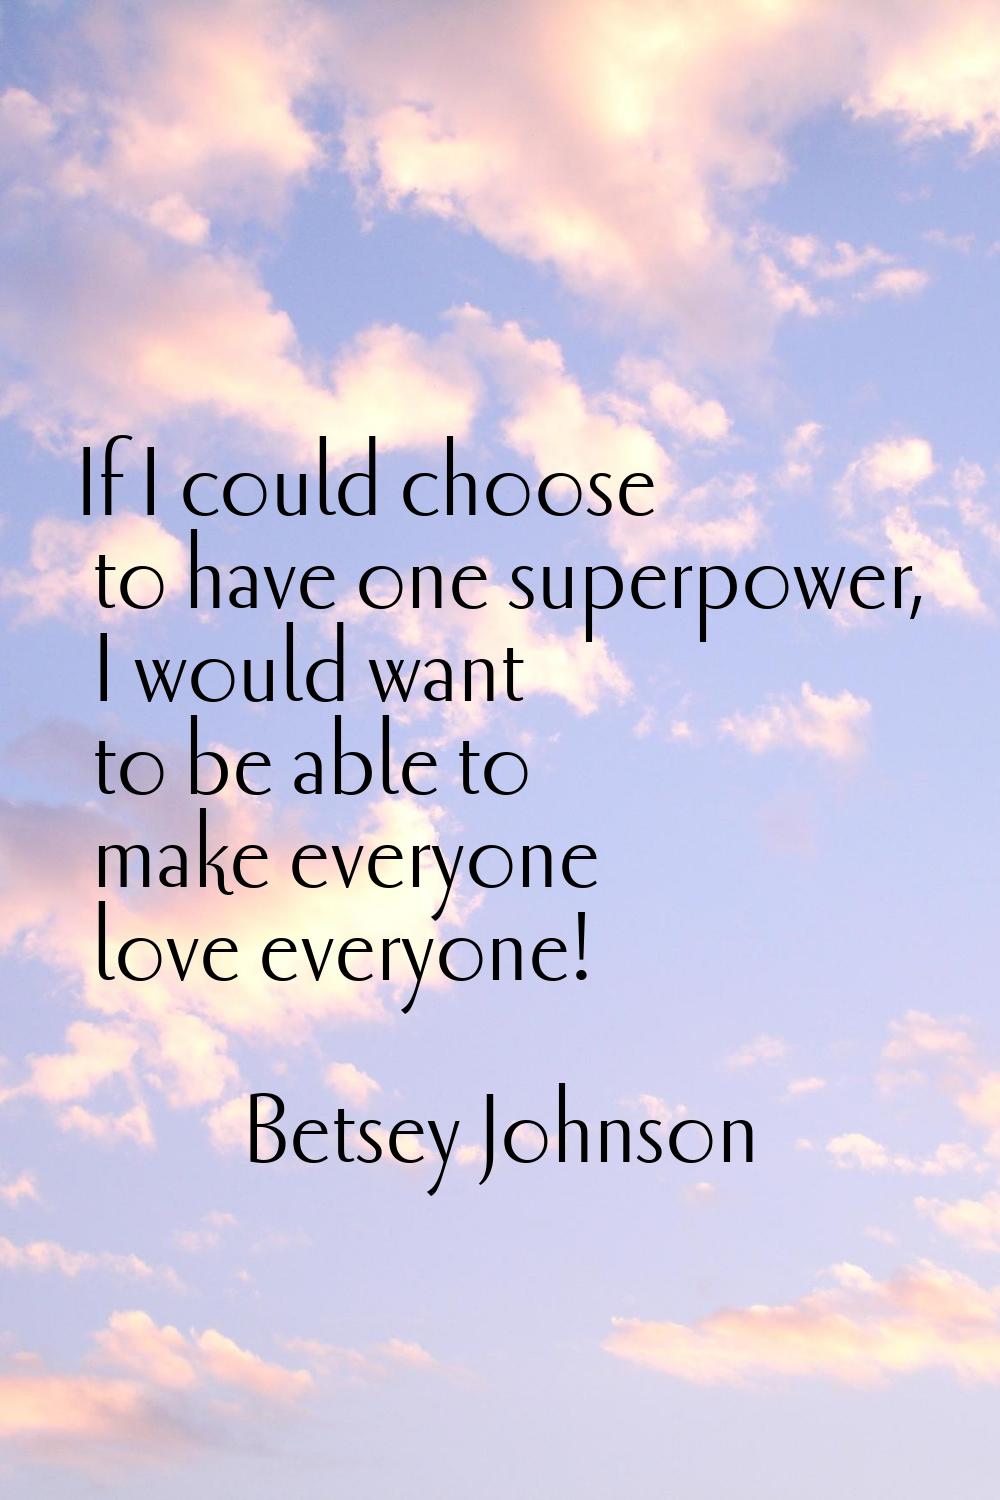 If I could choose to have one superpower, I would want to be able to make everyone love everyone!